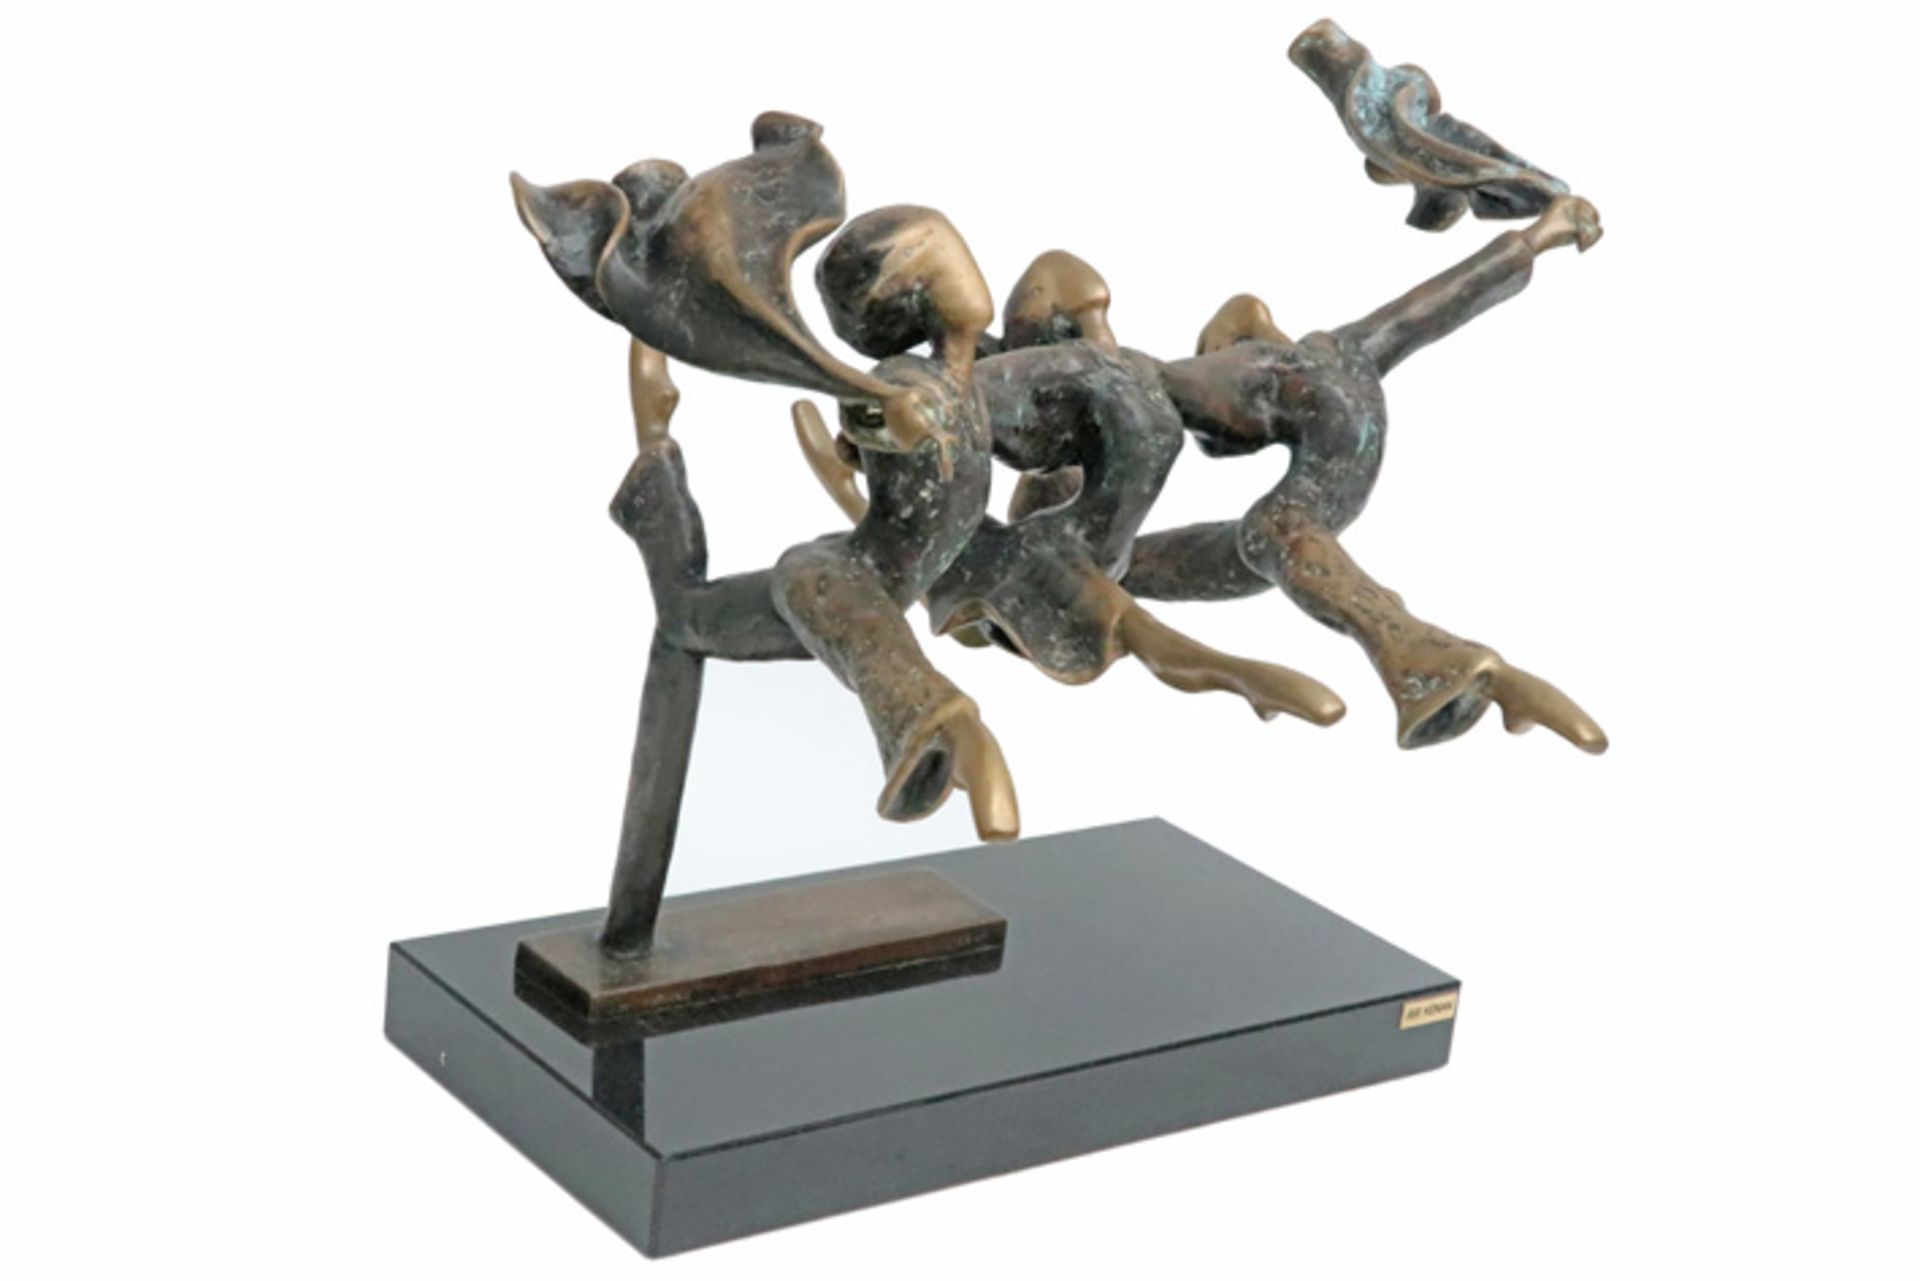 20th Cent. Avi Kenan sculpture in bronze titled "Flying Dancers" - signed and dated 1980 || AVI - Image 4 of 7